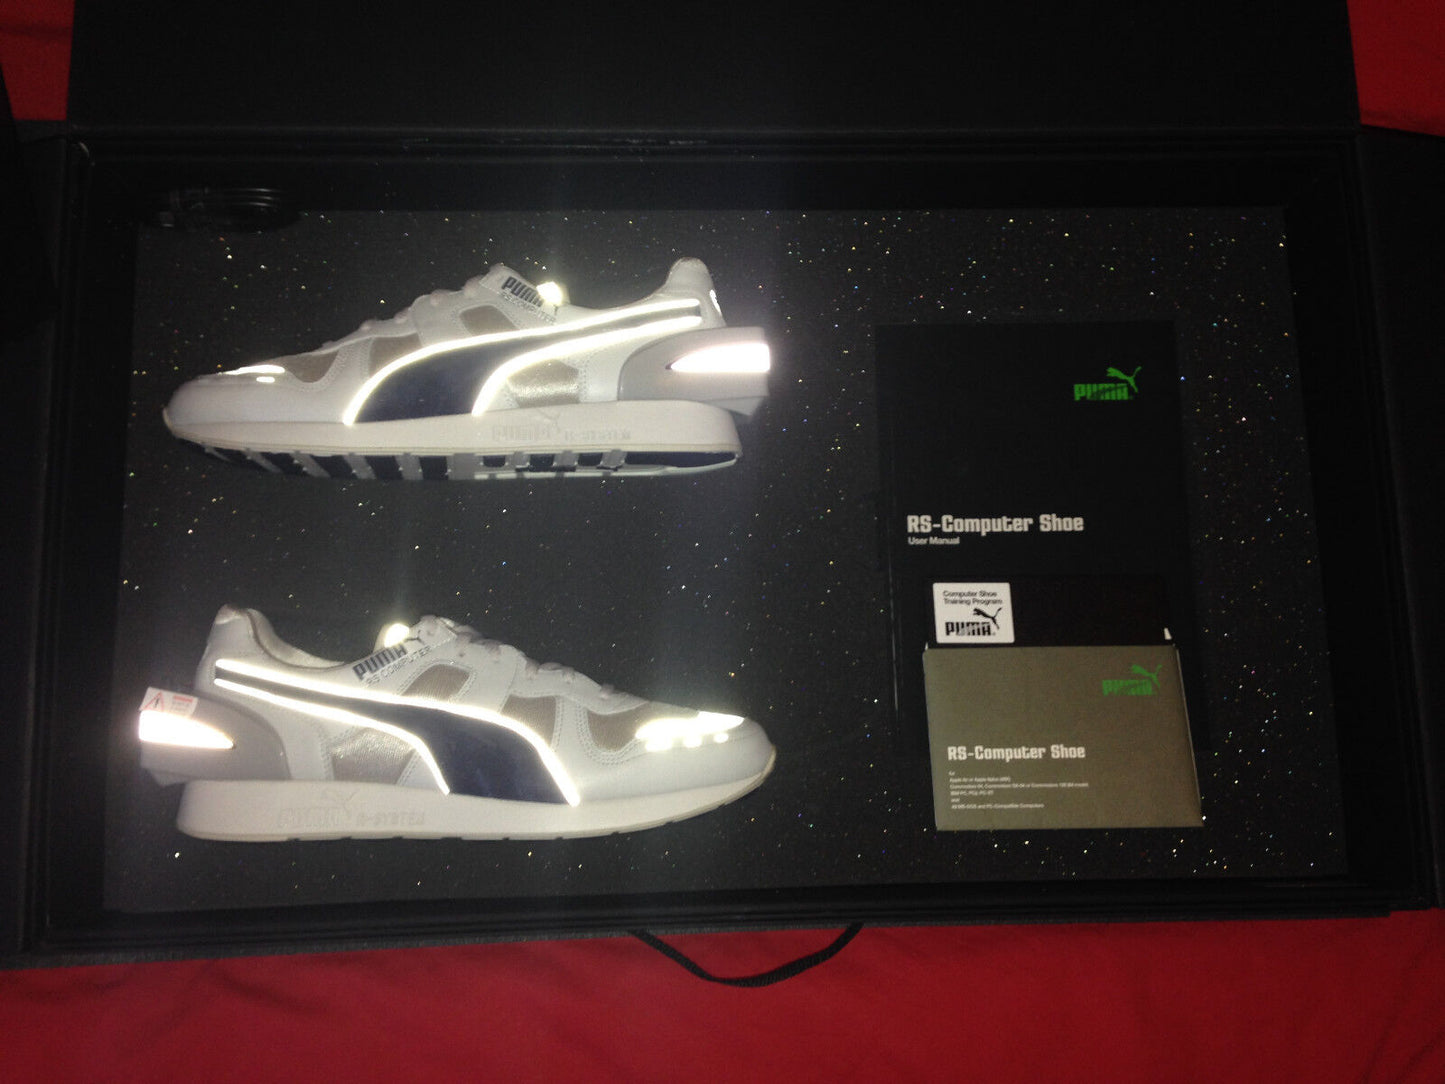 Puma RS Computer Shoe 1986-2018 #62 of 86 pairs worldwide new US 10 UK 9 EUR 43